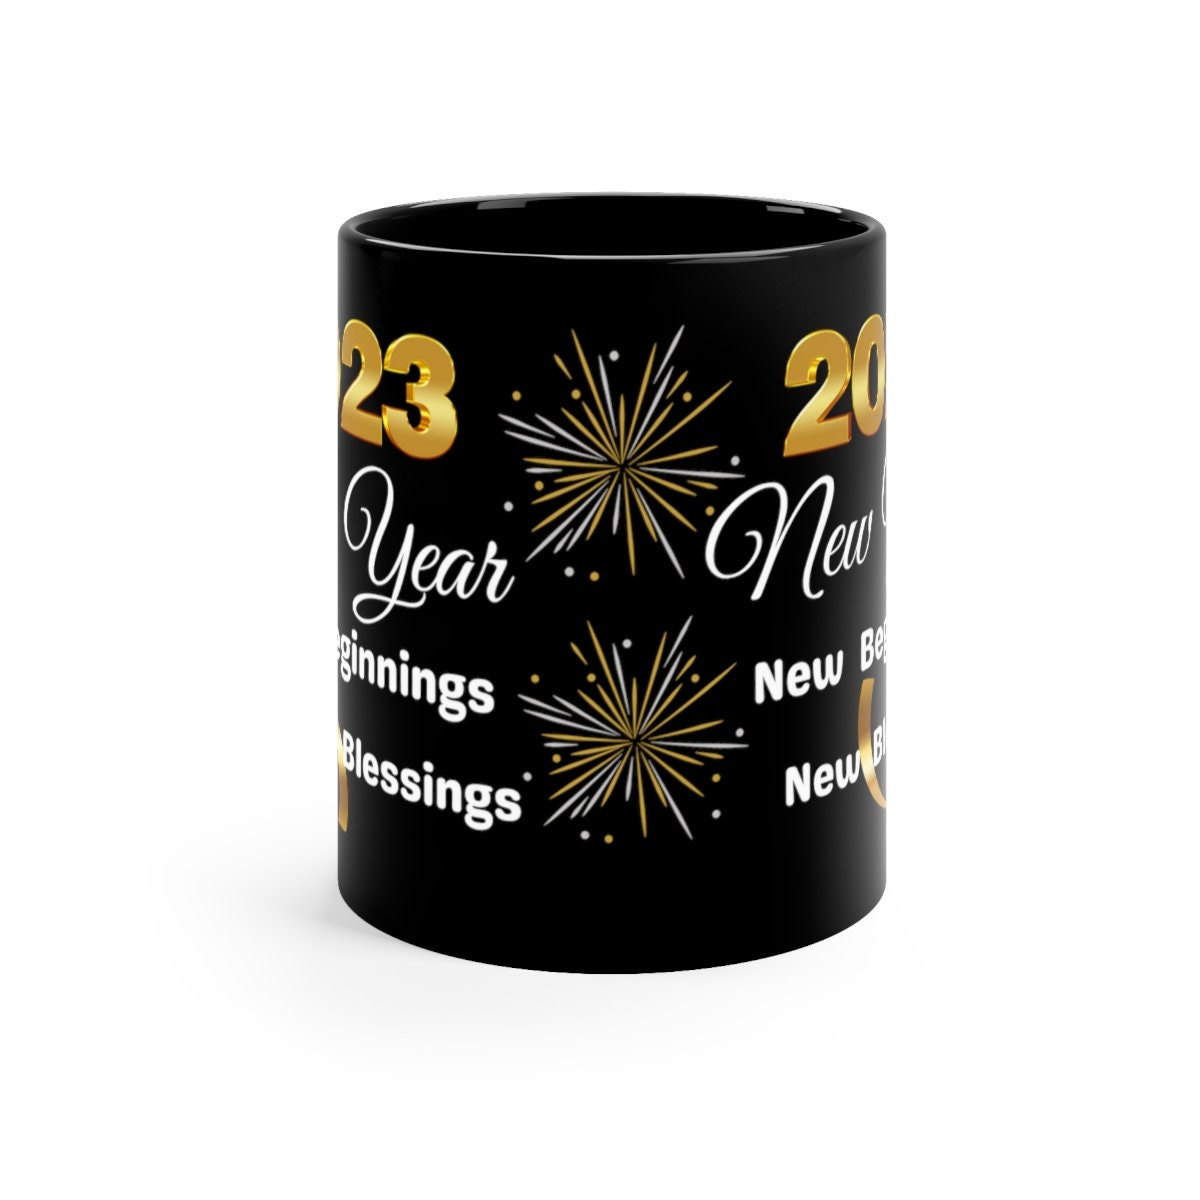 new year, new products 🤎 from trendy coffee mugs + candles, to